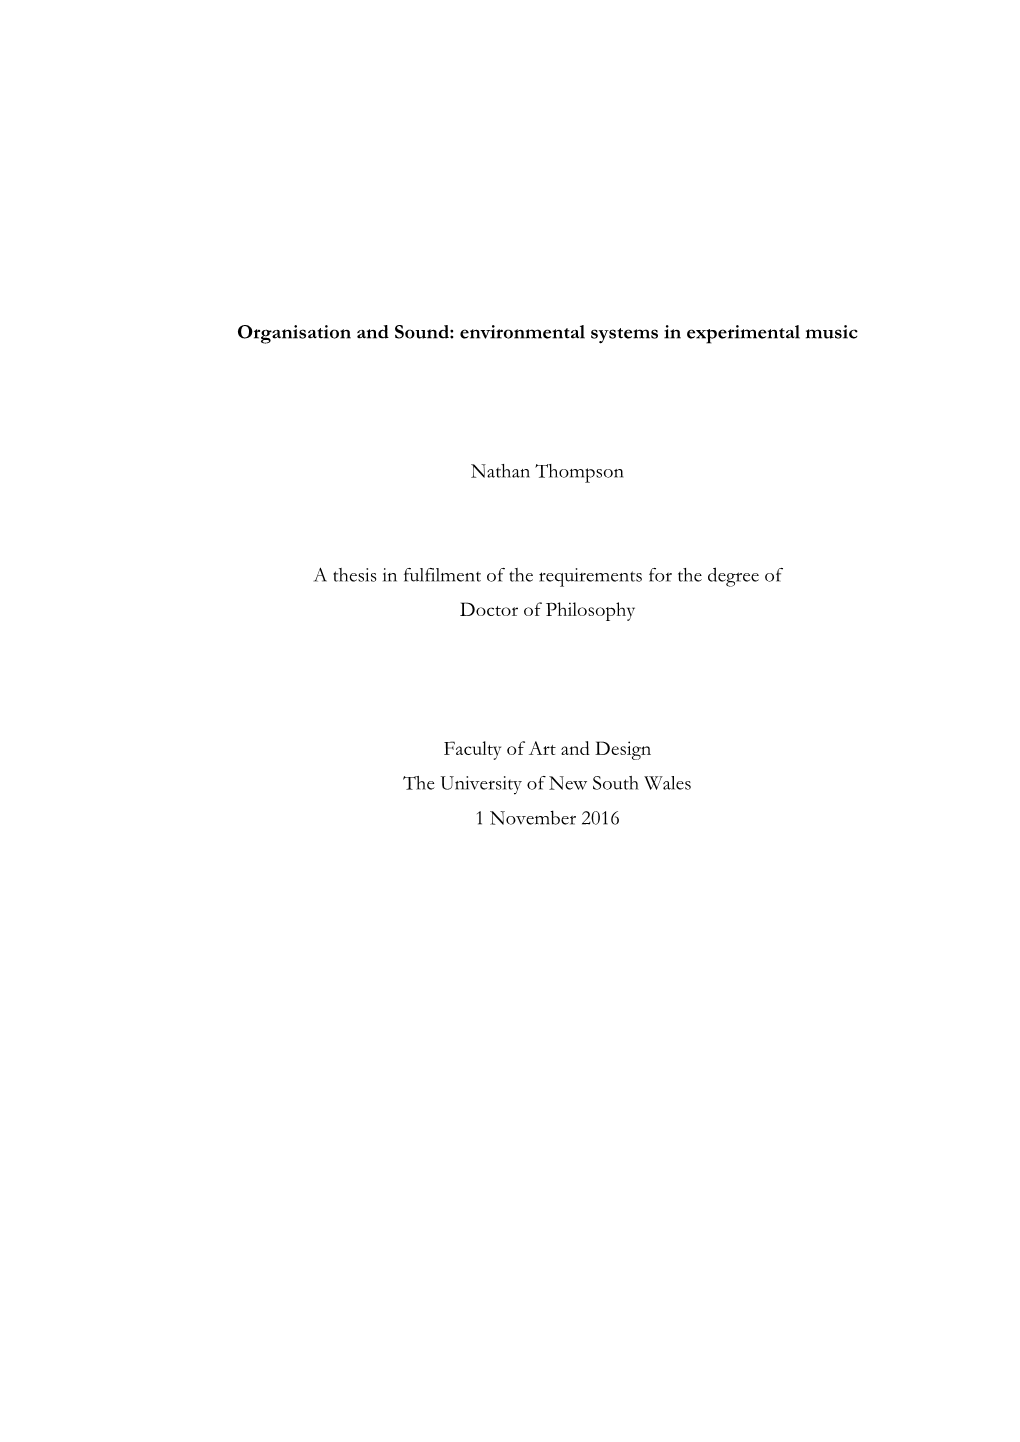 Environmental Systems in Experimental Music